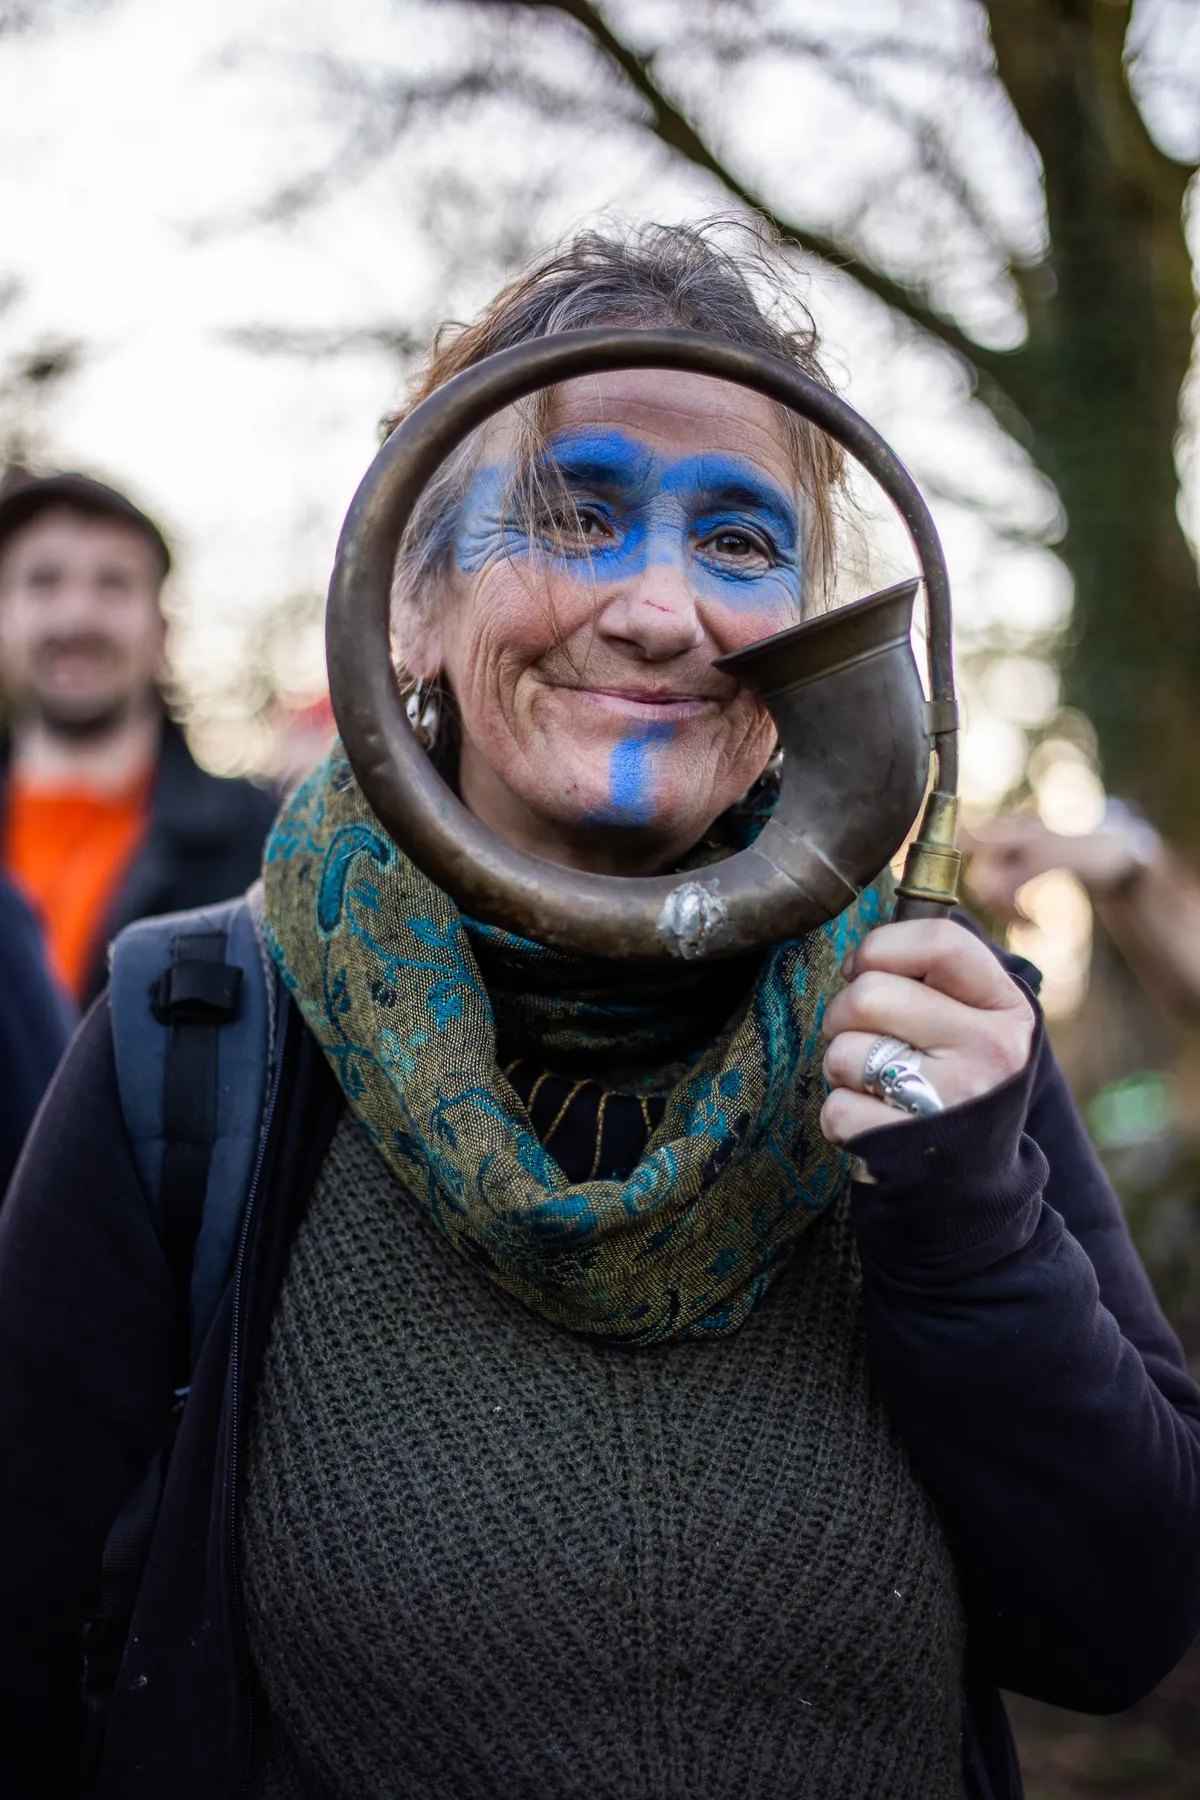 Right to Roam protestor with blue facepaint and horn